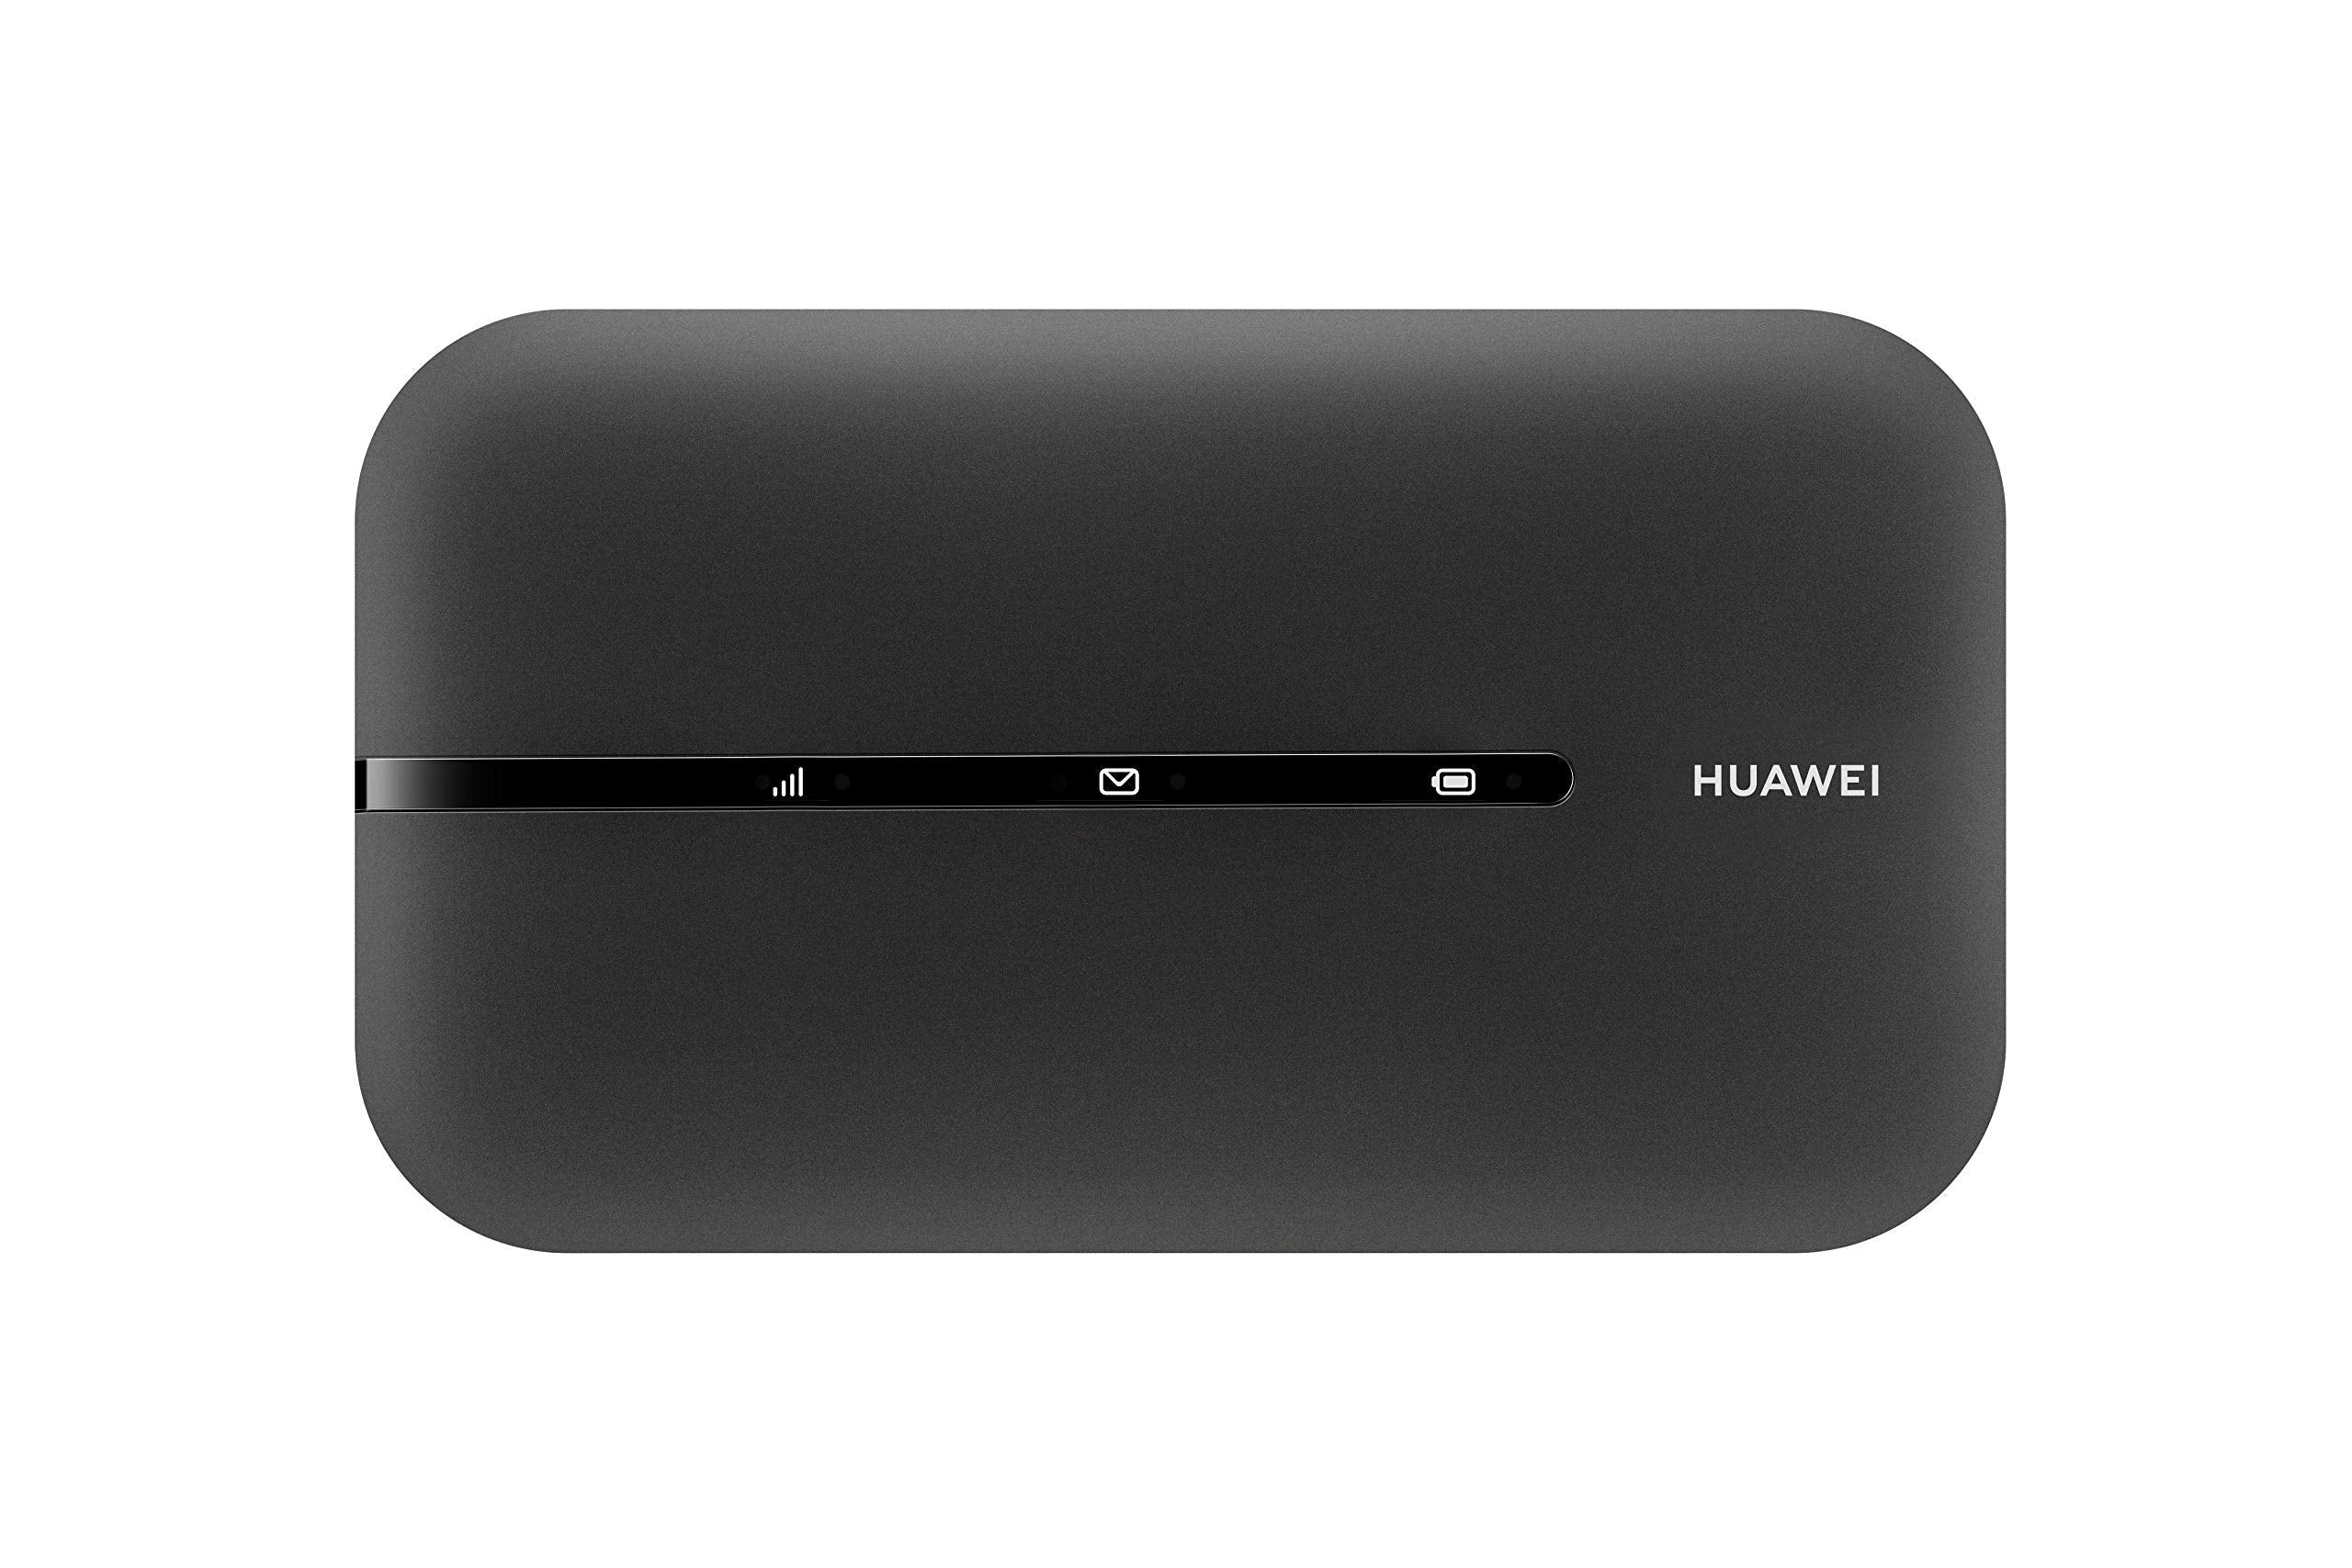 Huawei E5783 (Black) 300Mbps CAT 7 4G/LTE Travel Mobile Wi-Fi Hotspot. Works with any Sim Card Worldwide. Connect 16 Wireless devices. No config required (Renewed) (E5783B-230 (1500mAh Battery))